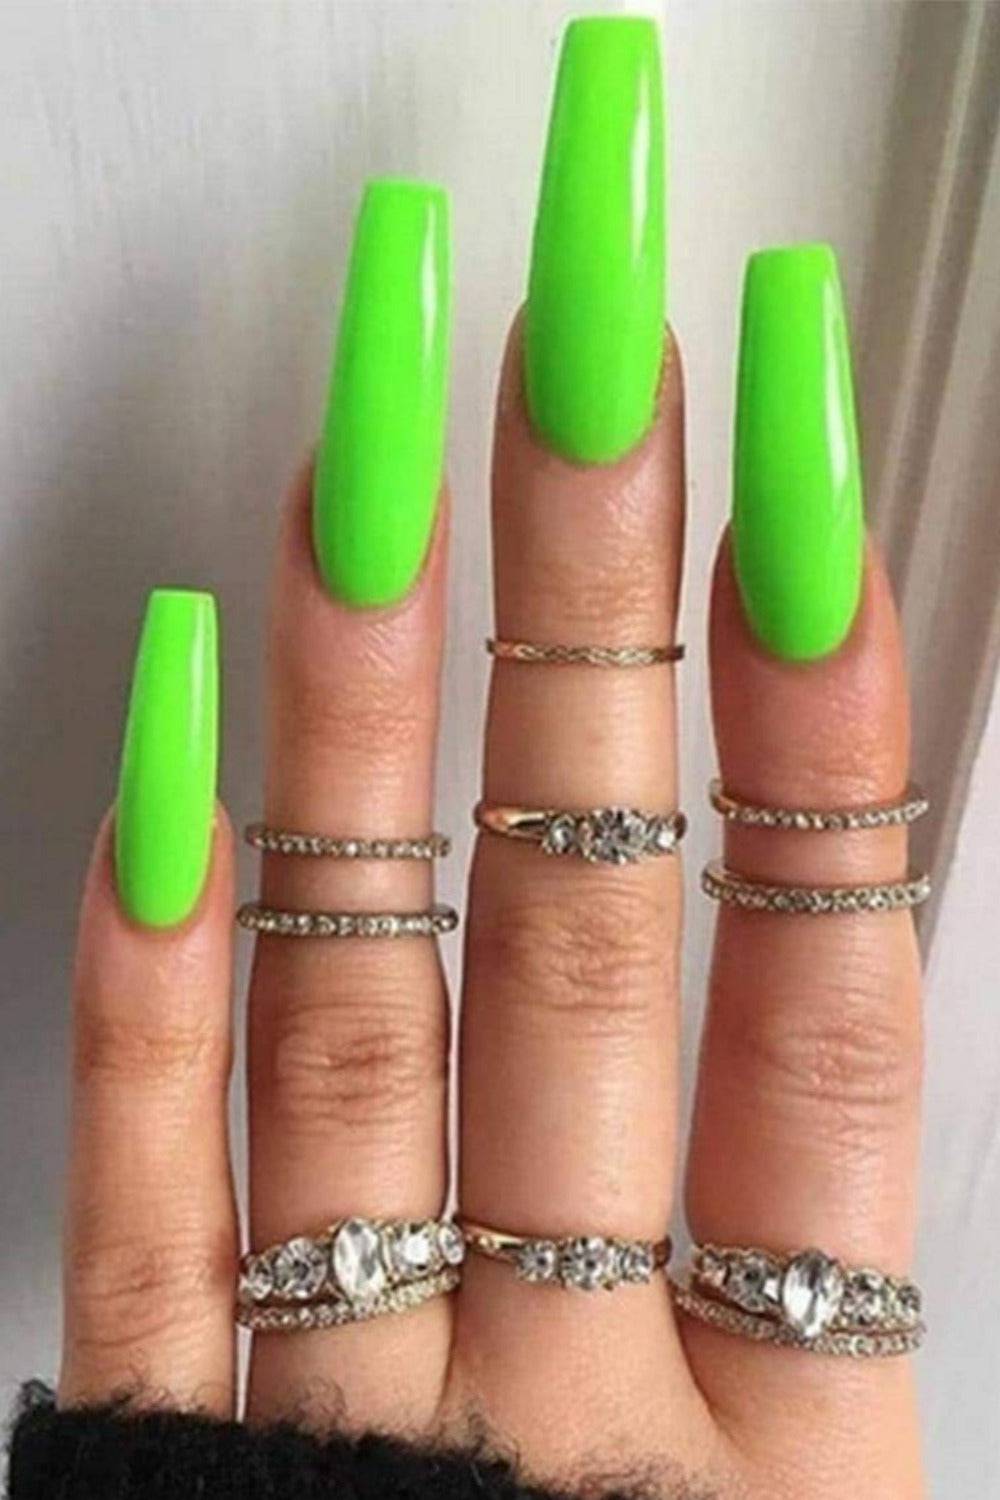 Perfet gifts for mother's day】Fofosbeauty 24pcs Press-on Nails Coffin  Manicure Nail Polish Appuyez sur les Ongles Faux Ongles,Green Grass -  Walmart.ca